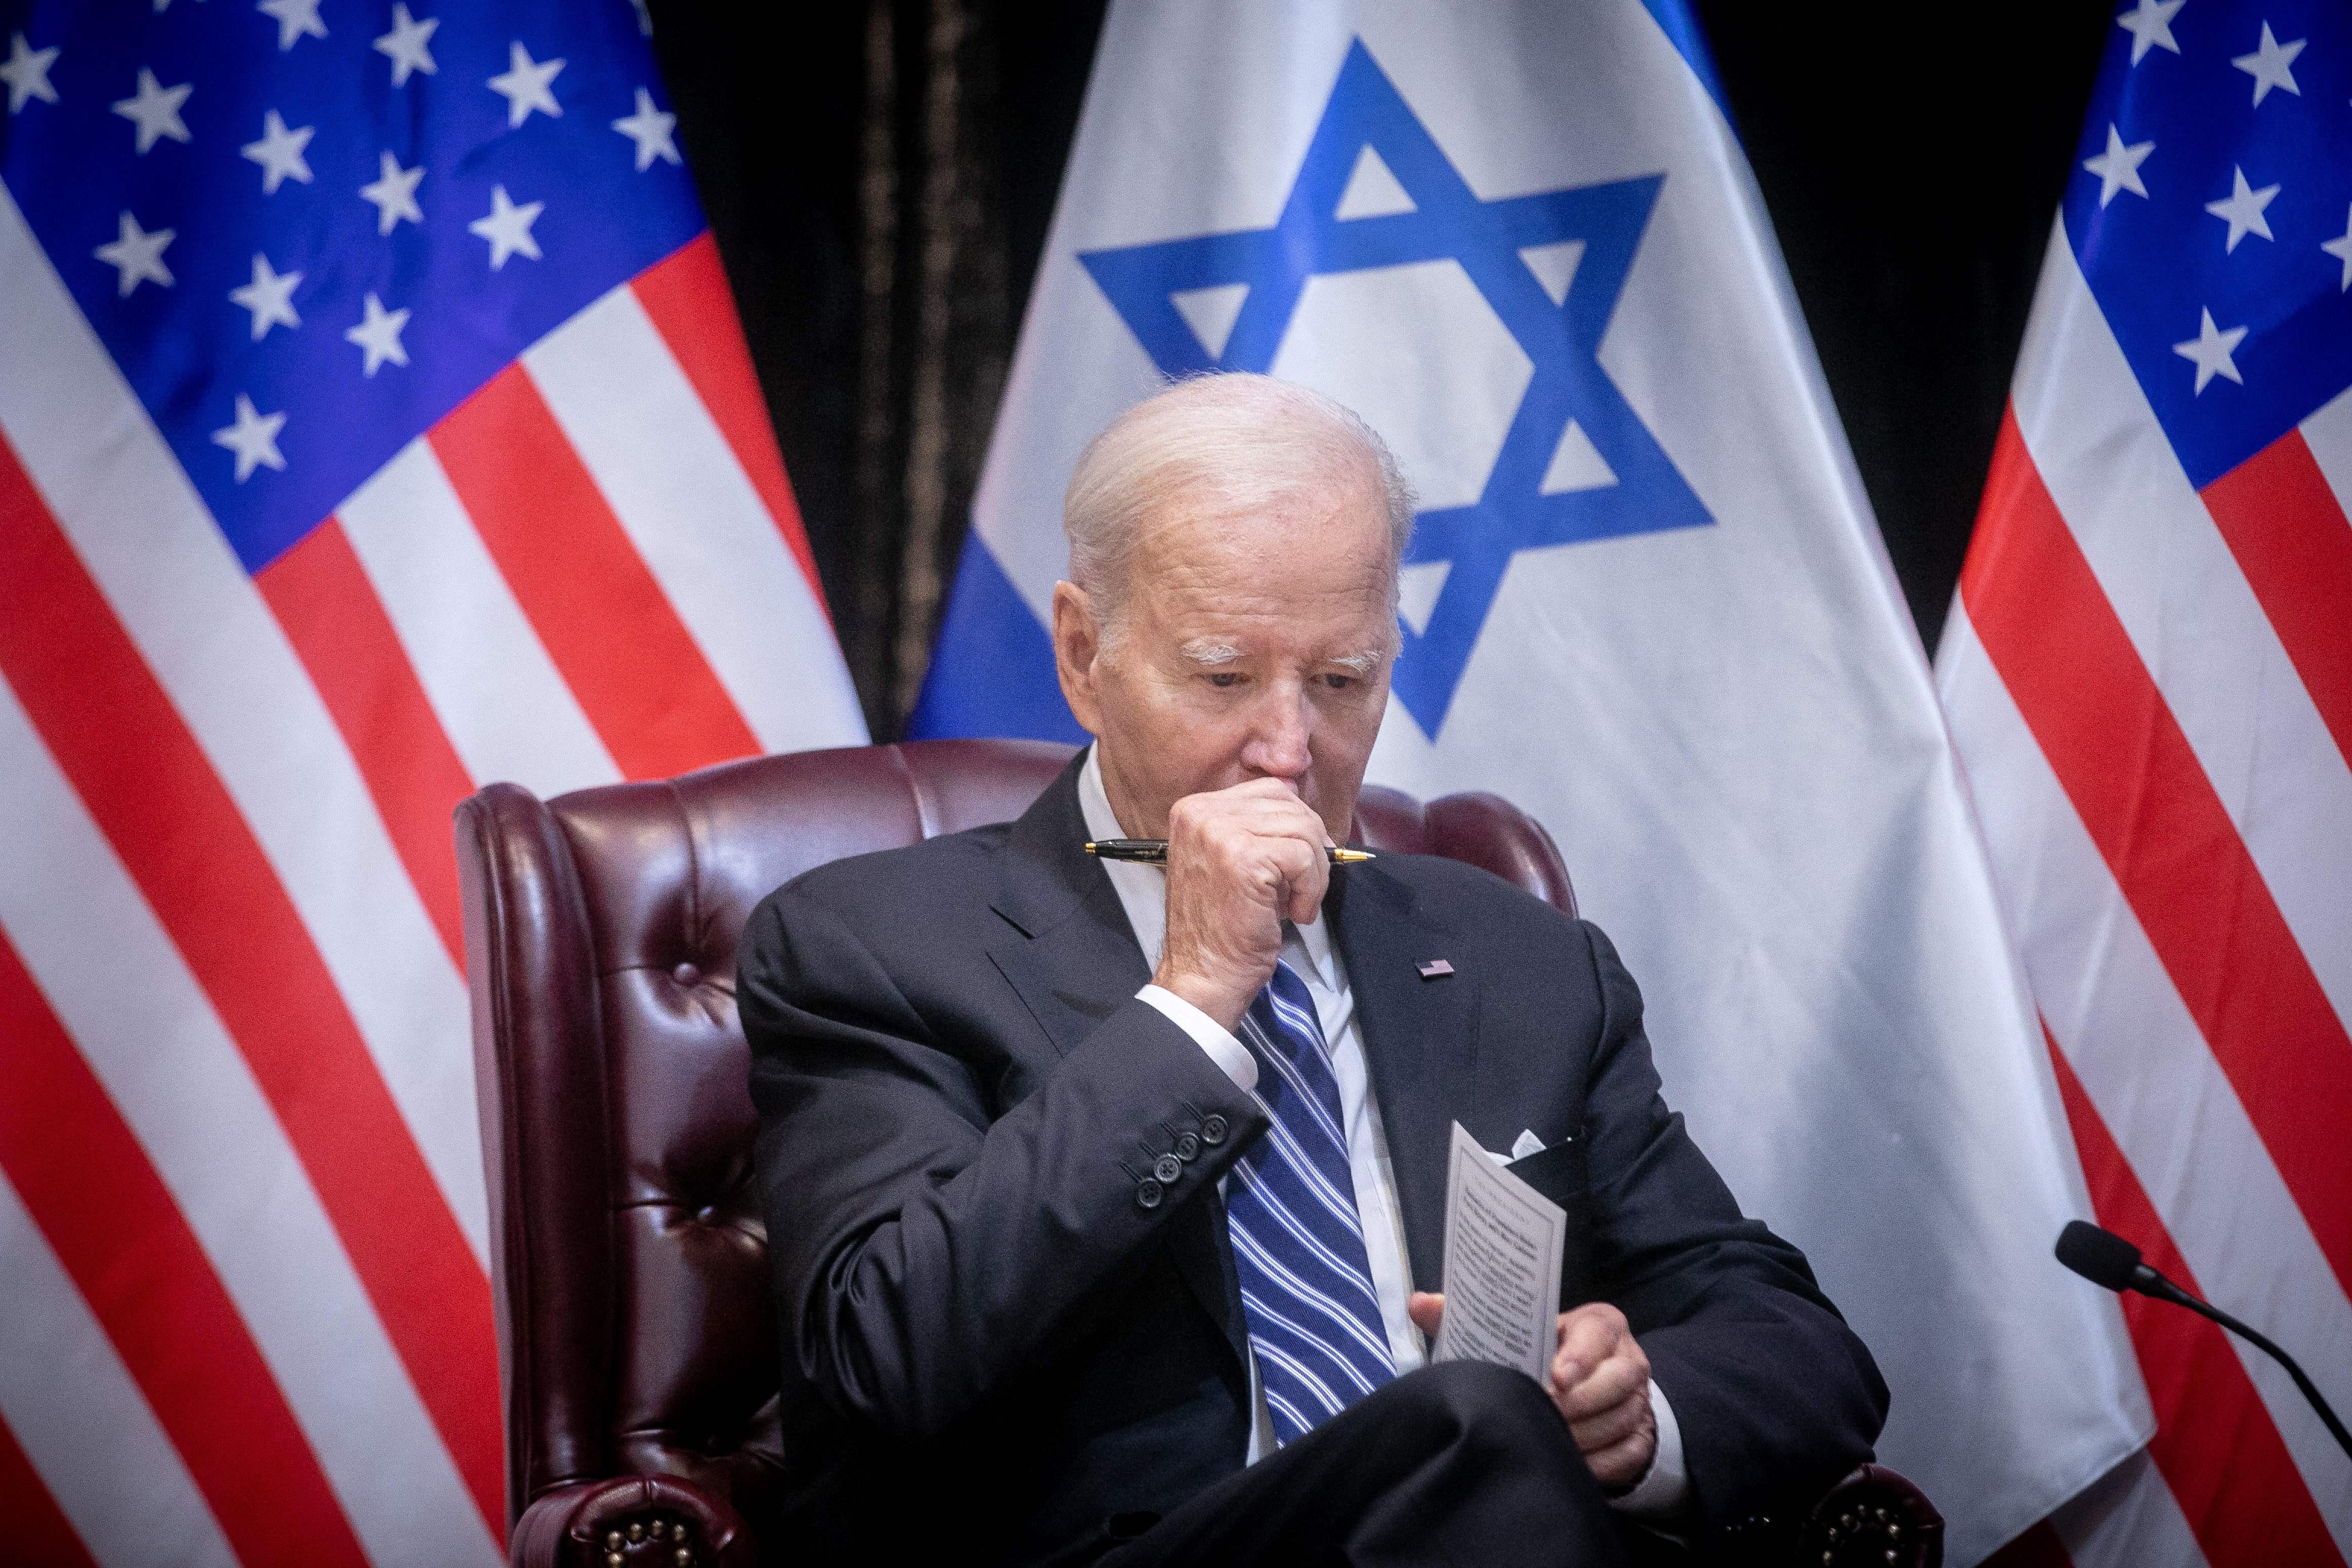 Biden seated in front of Israeli and American flags, looking downward with his fist clutched to his mouth, holding a pen, and a notecard or pamphlet of some kind in his other hand.